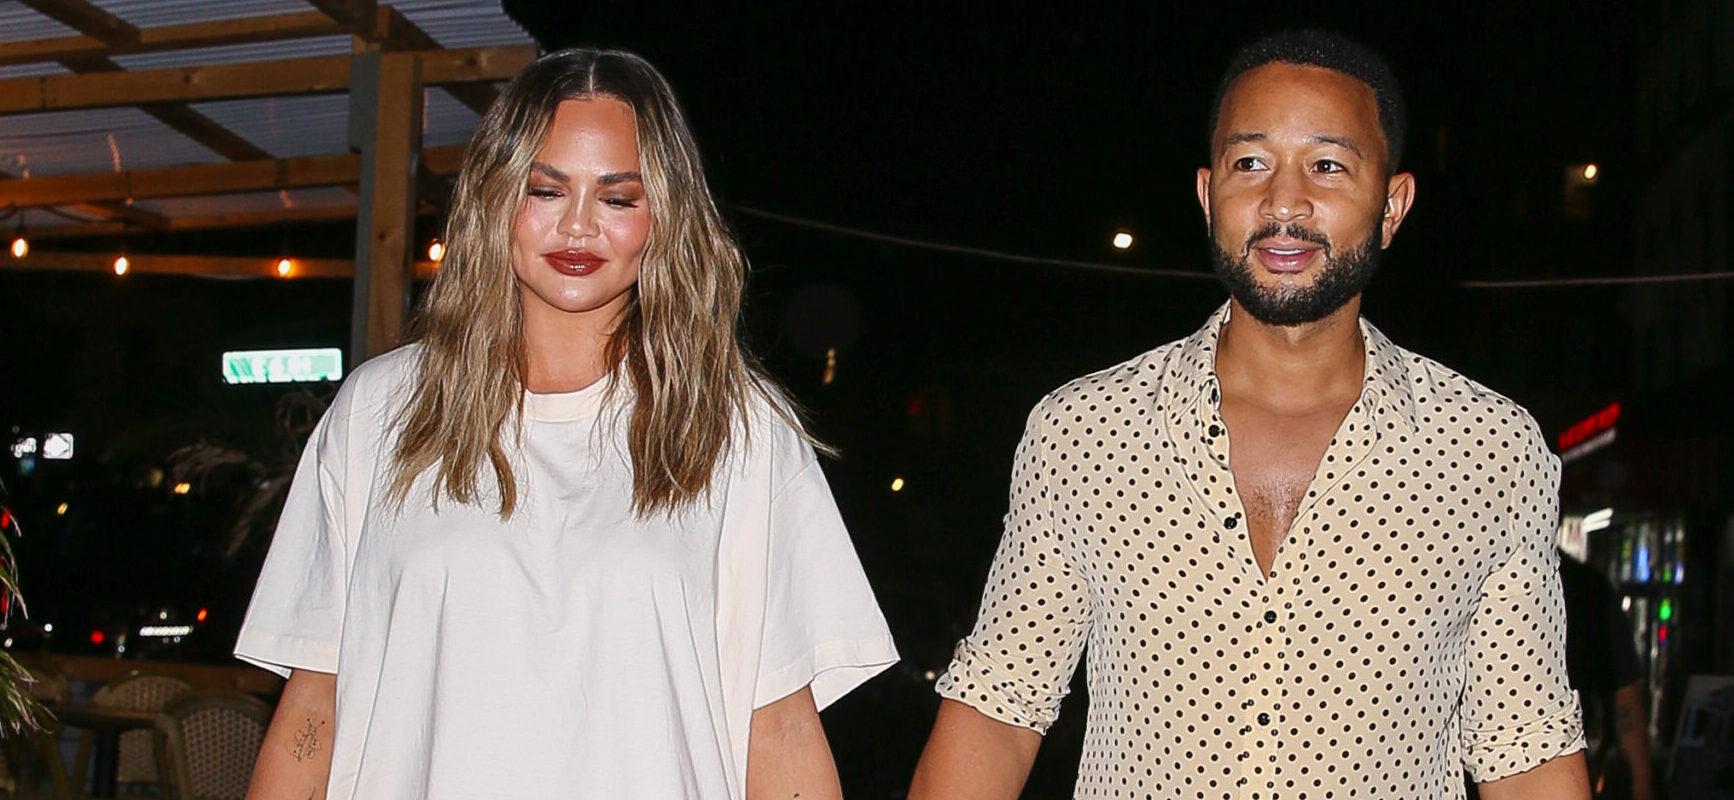 Chrissy Teigen and John Legend they look all happy as heading out for dinner in New York City on Aug 19 2021